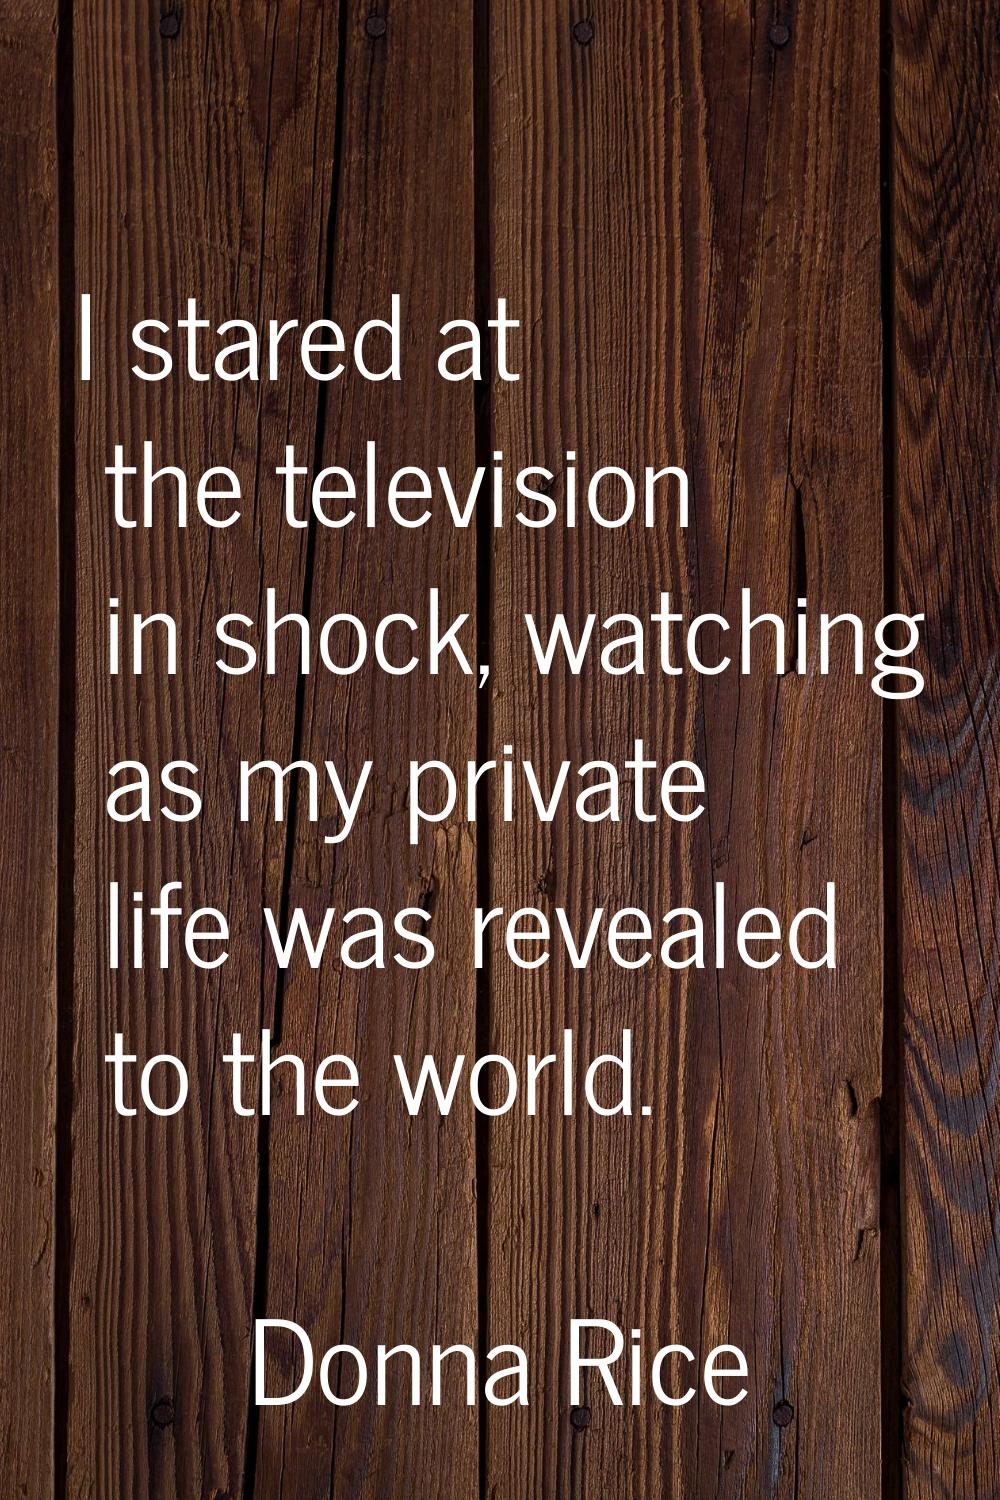 I stared at the television in shock, watching as my private life was revealed to the world.